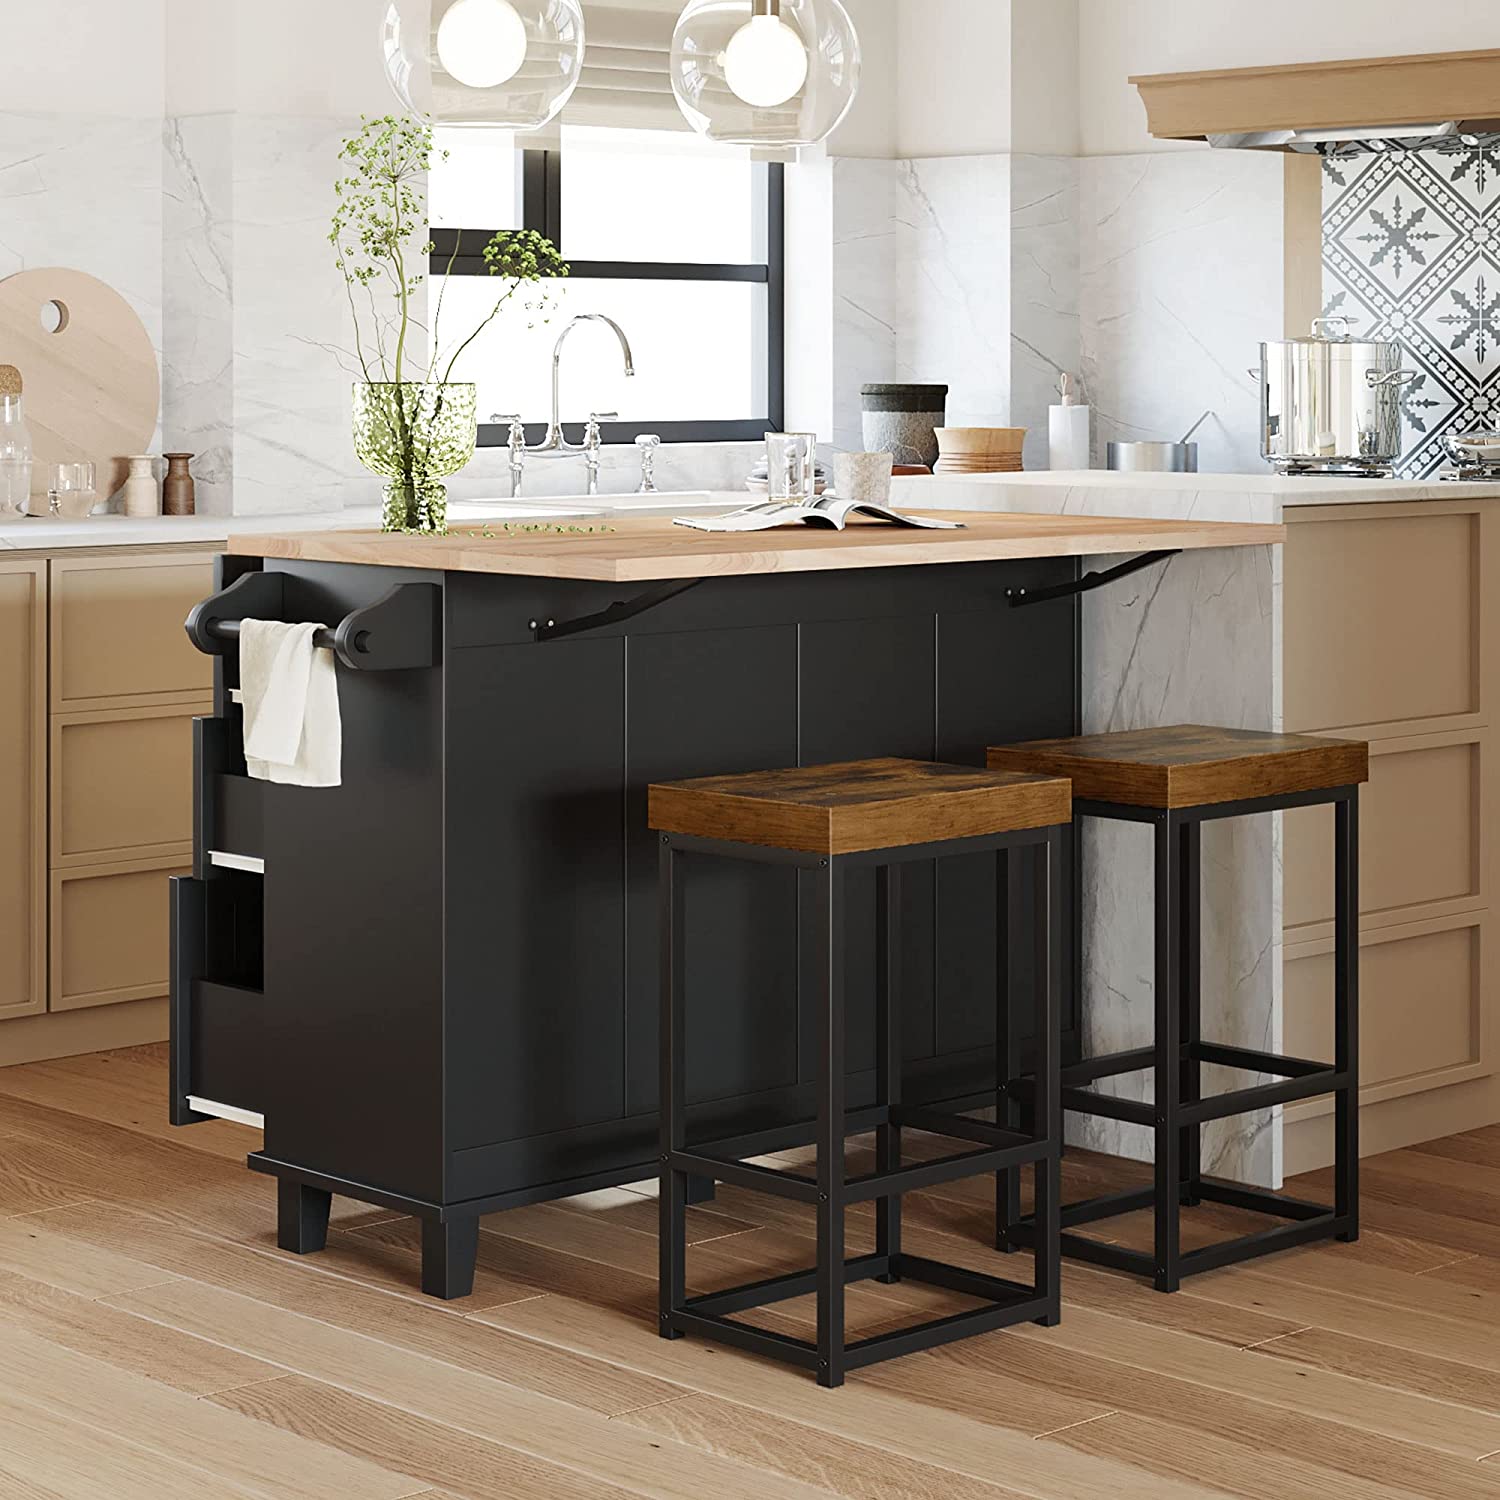 Top Amazon Finds: Kitchen Island with Seating Options